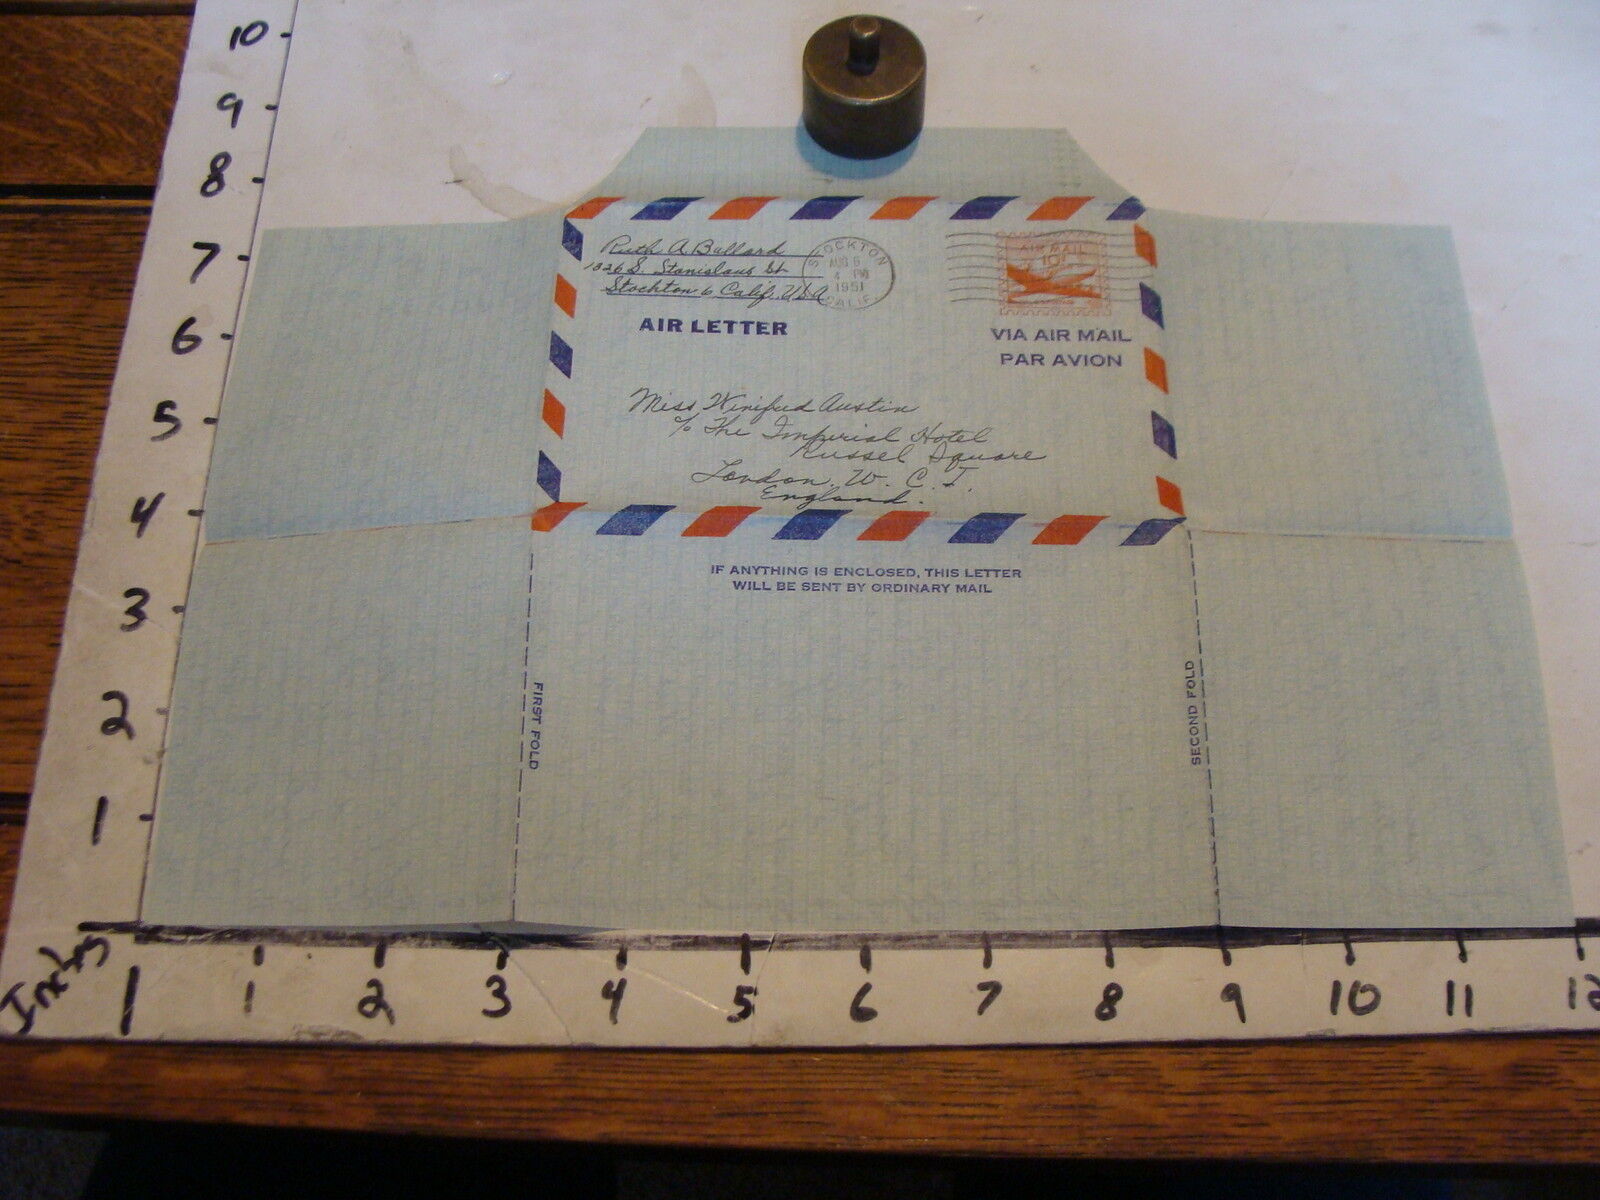 1951 TRAVEL paper: Neat Envelope/letter in one, from California to London